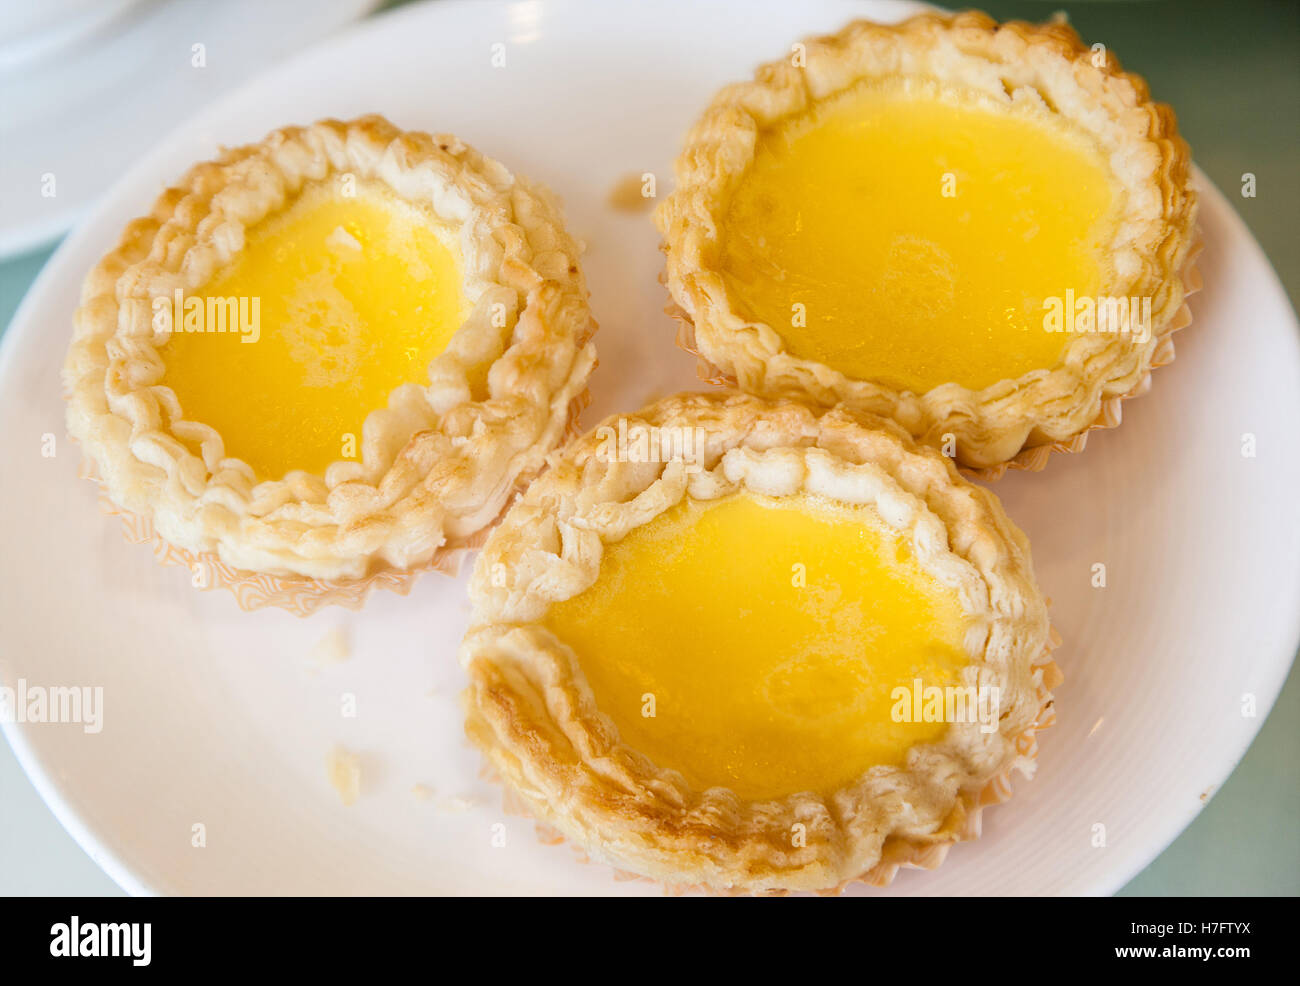 Baked egg tart dim sum is a popular dessert in Cantonese restaurants in Hong Kong and southern China. Stock Photo